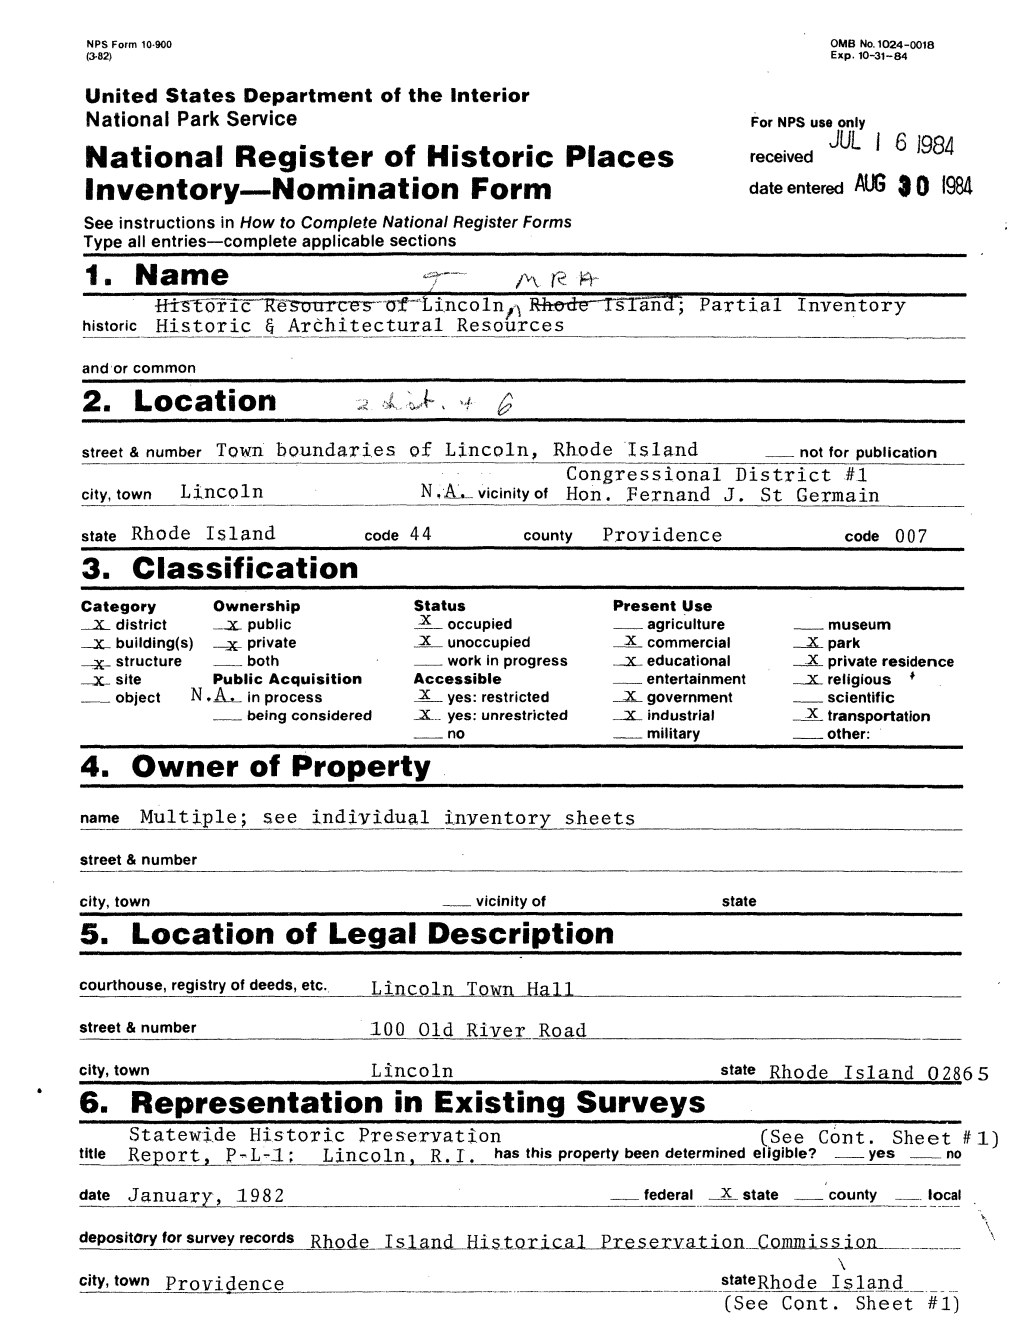 984 Inventory Nomination Form Date